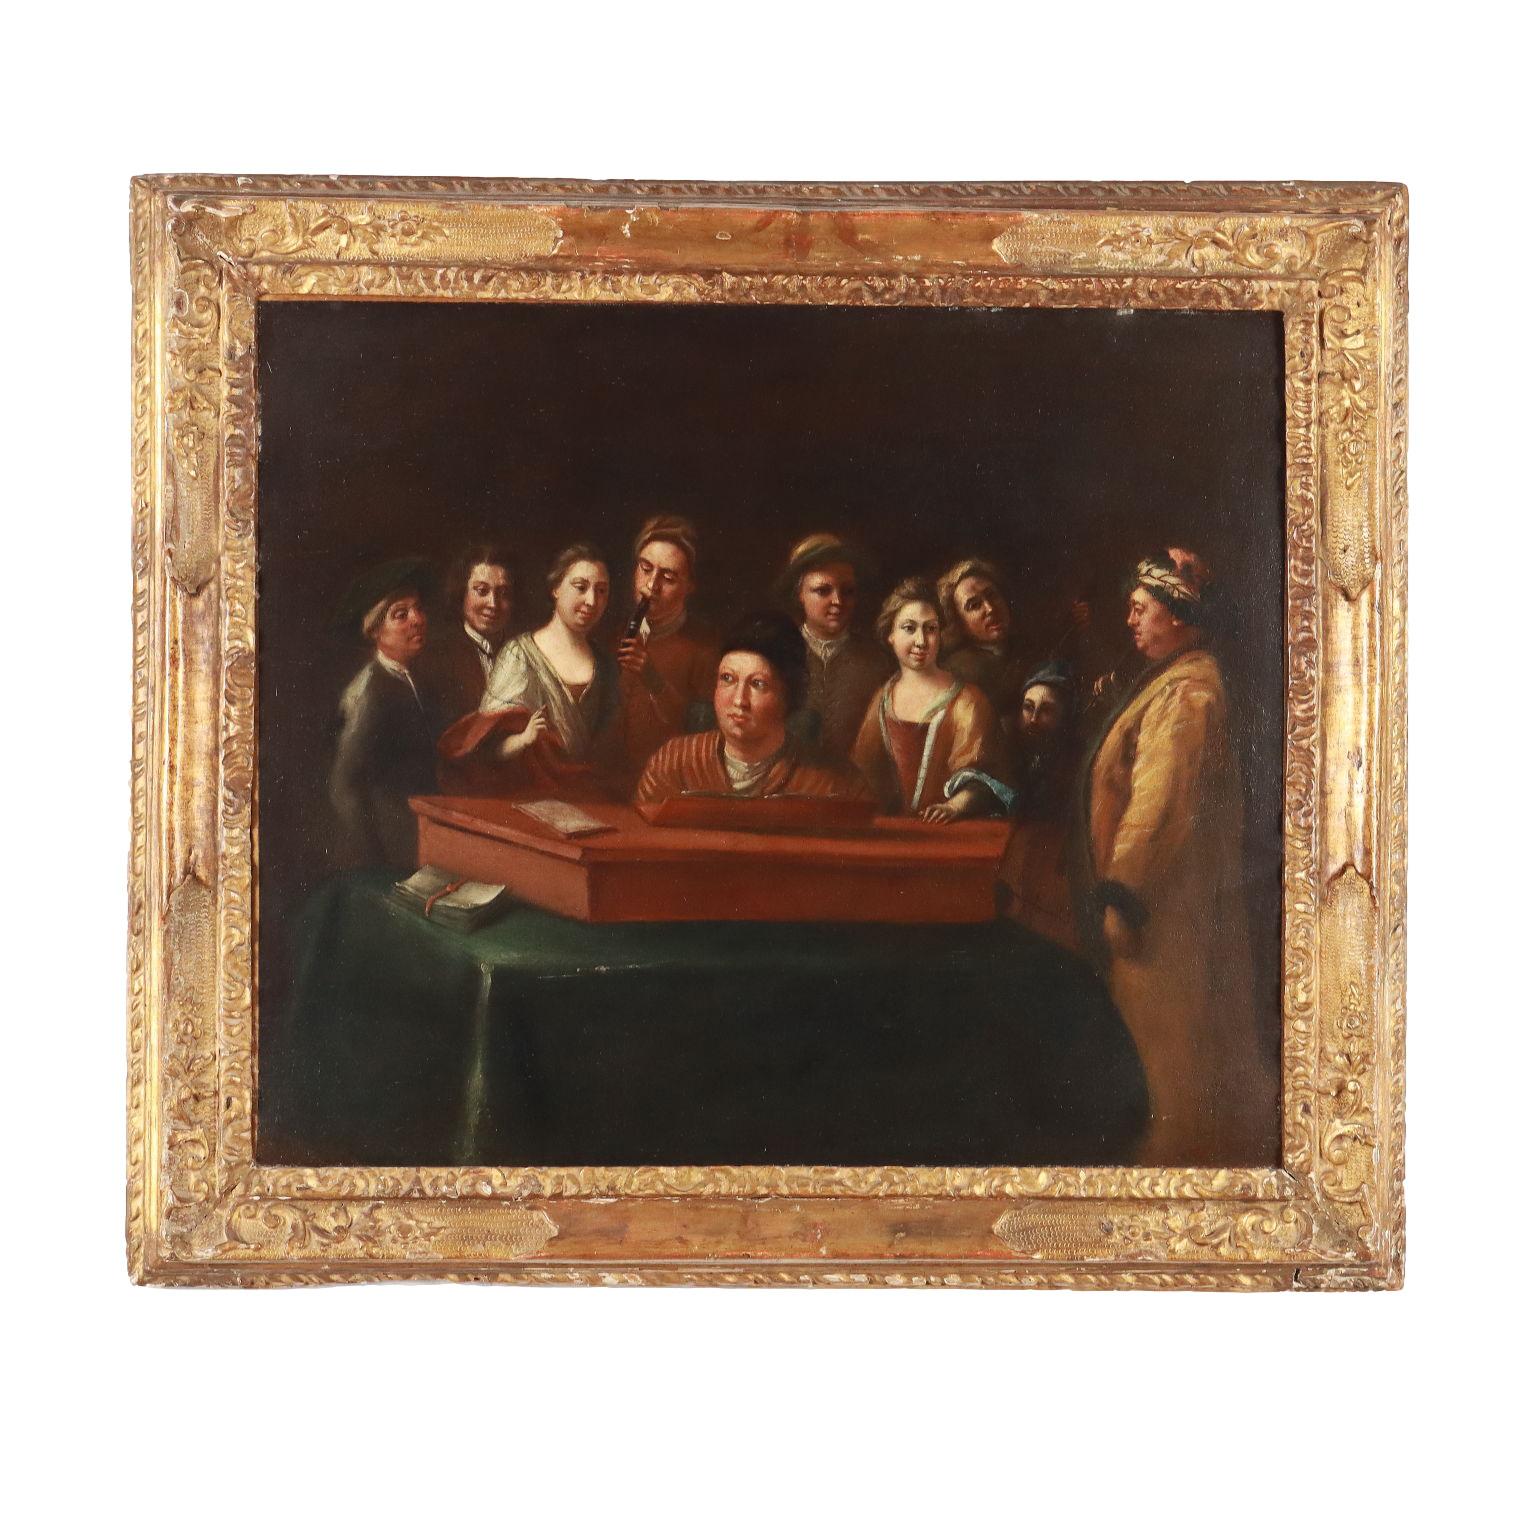 Unknown Figurative Painting - Painting with Concert Scene, 18th century